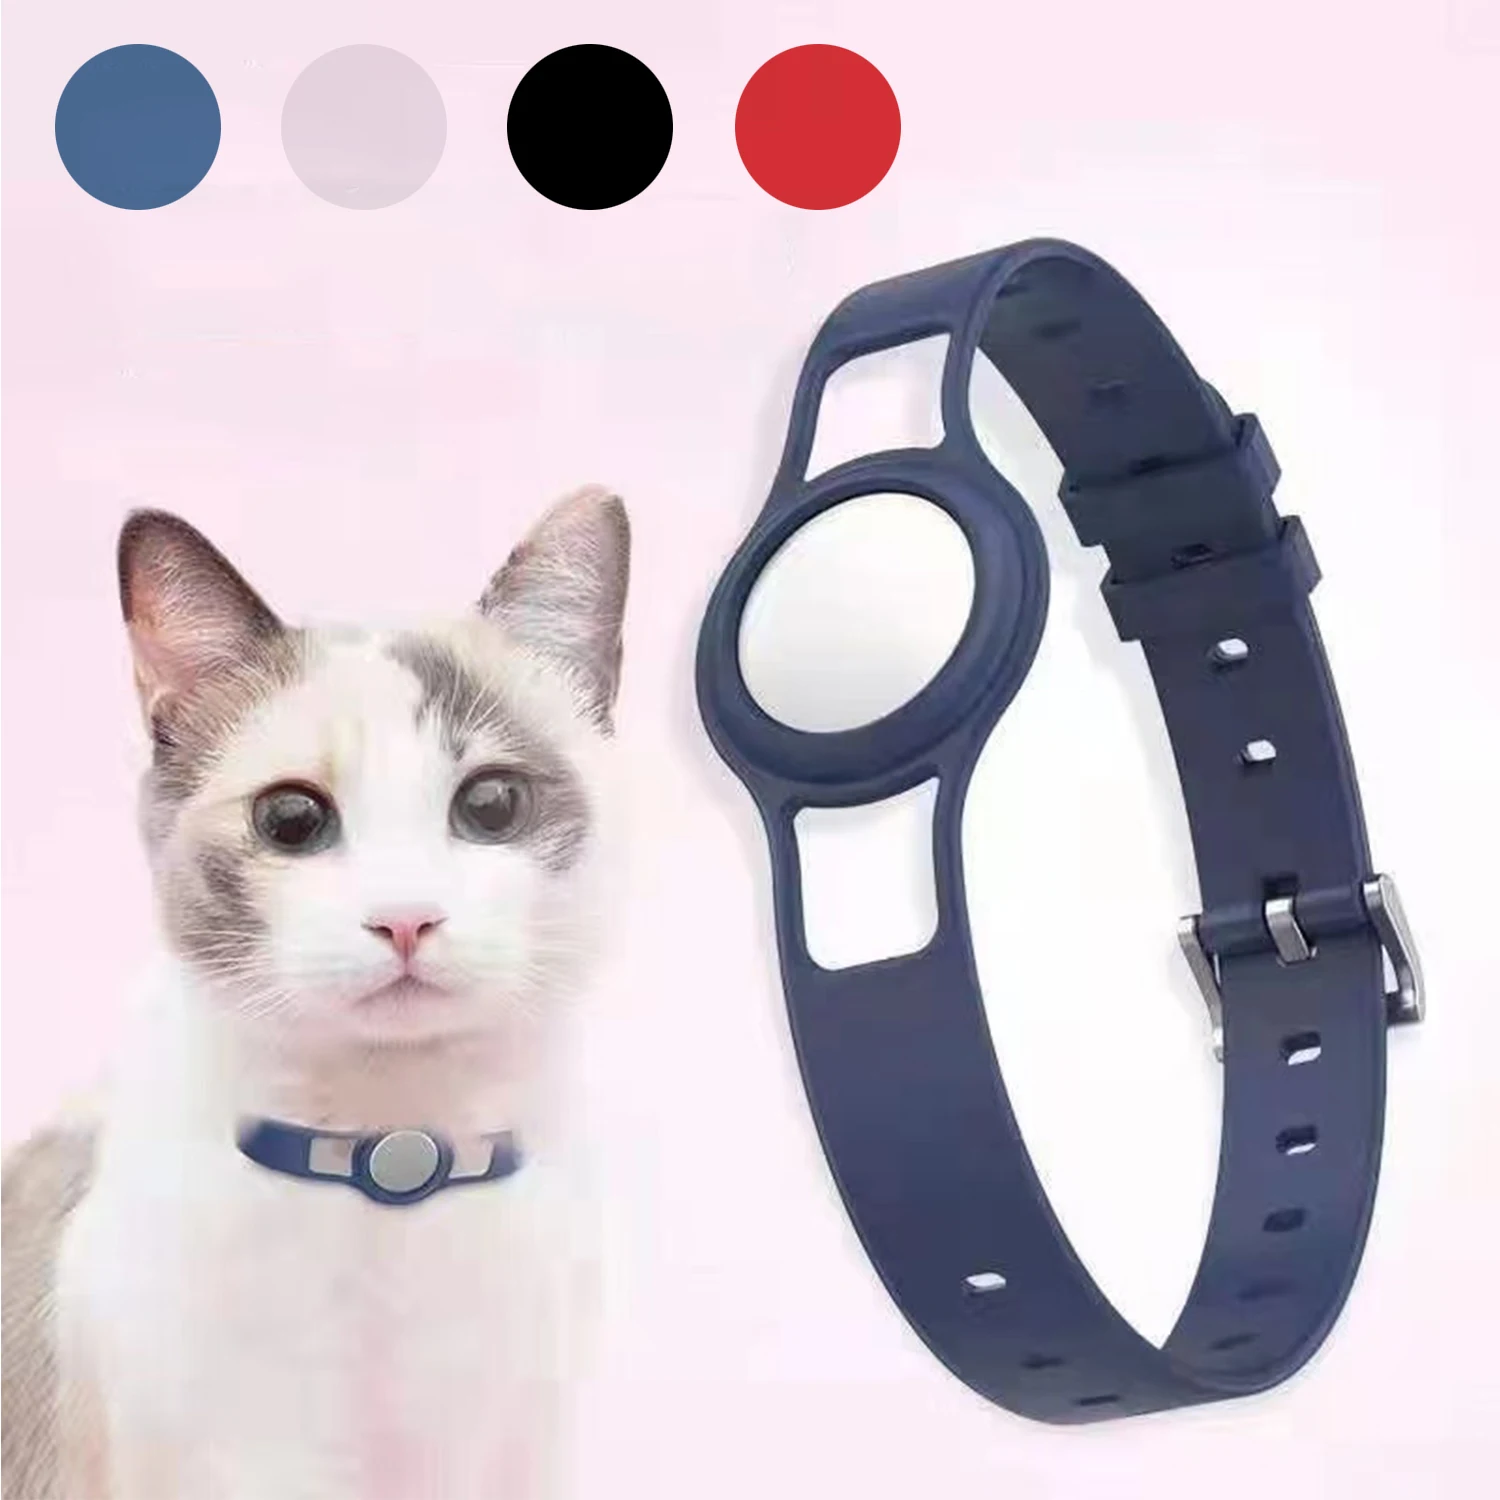 

1PC Pet Collar Anti-lost Sleeve Wrist Strap for Airtags Outdoor Park Dog &cat Location Tracking Replacement Wristband Case Cover